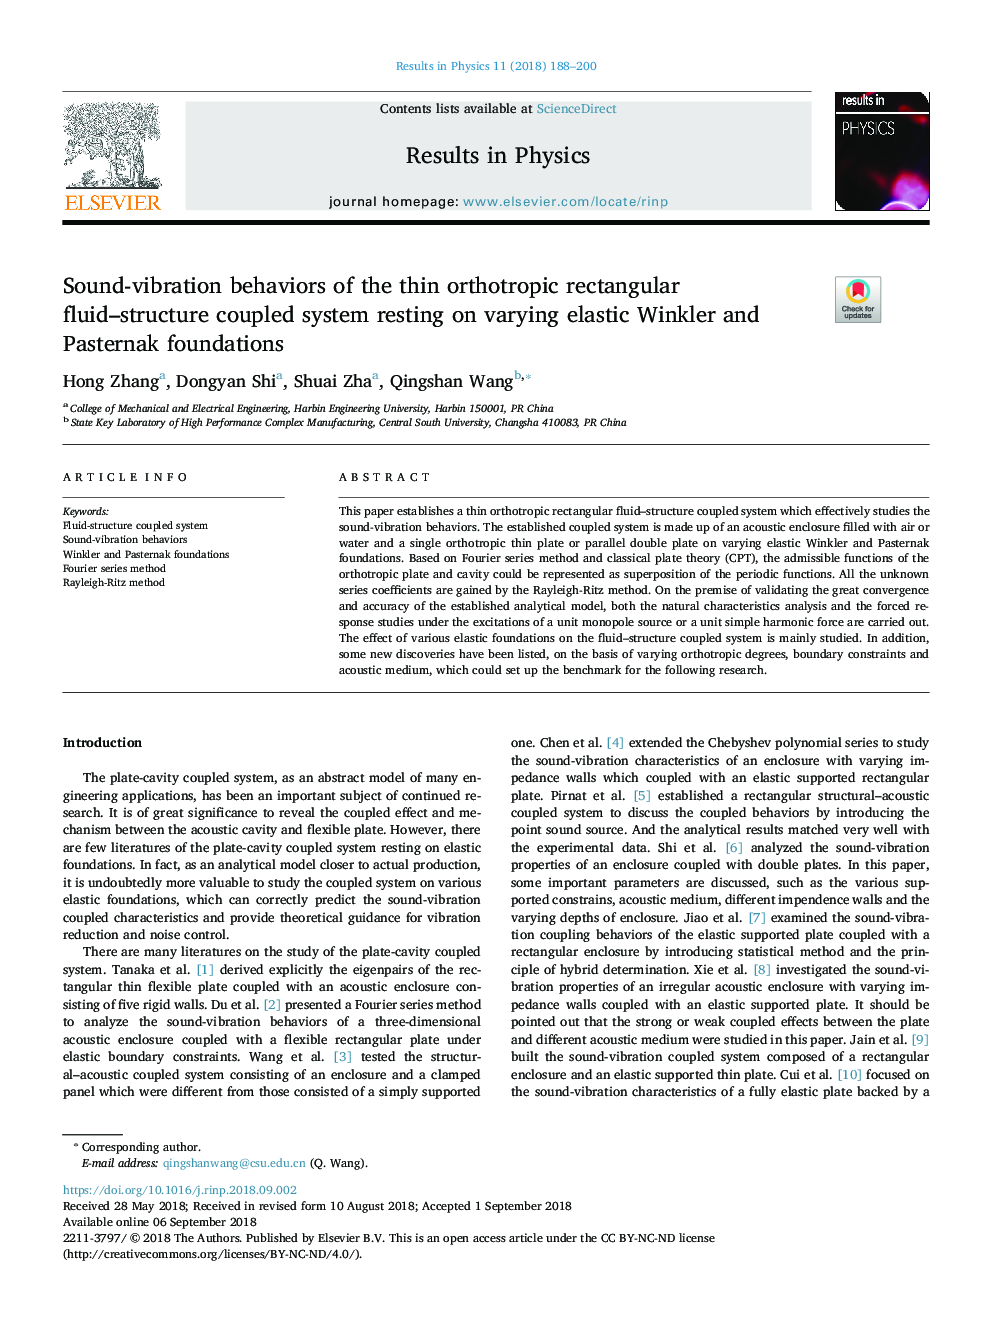 Sound-vibration behaviors of the thin orthotropic rectangular fluid-structure coupled system resting on varying elastic Winkler and Pasternak foundations